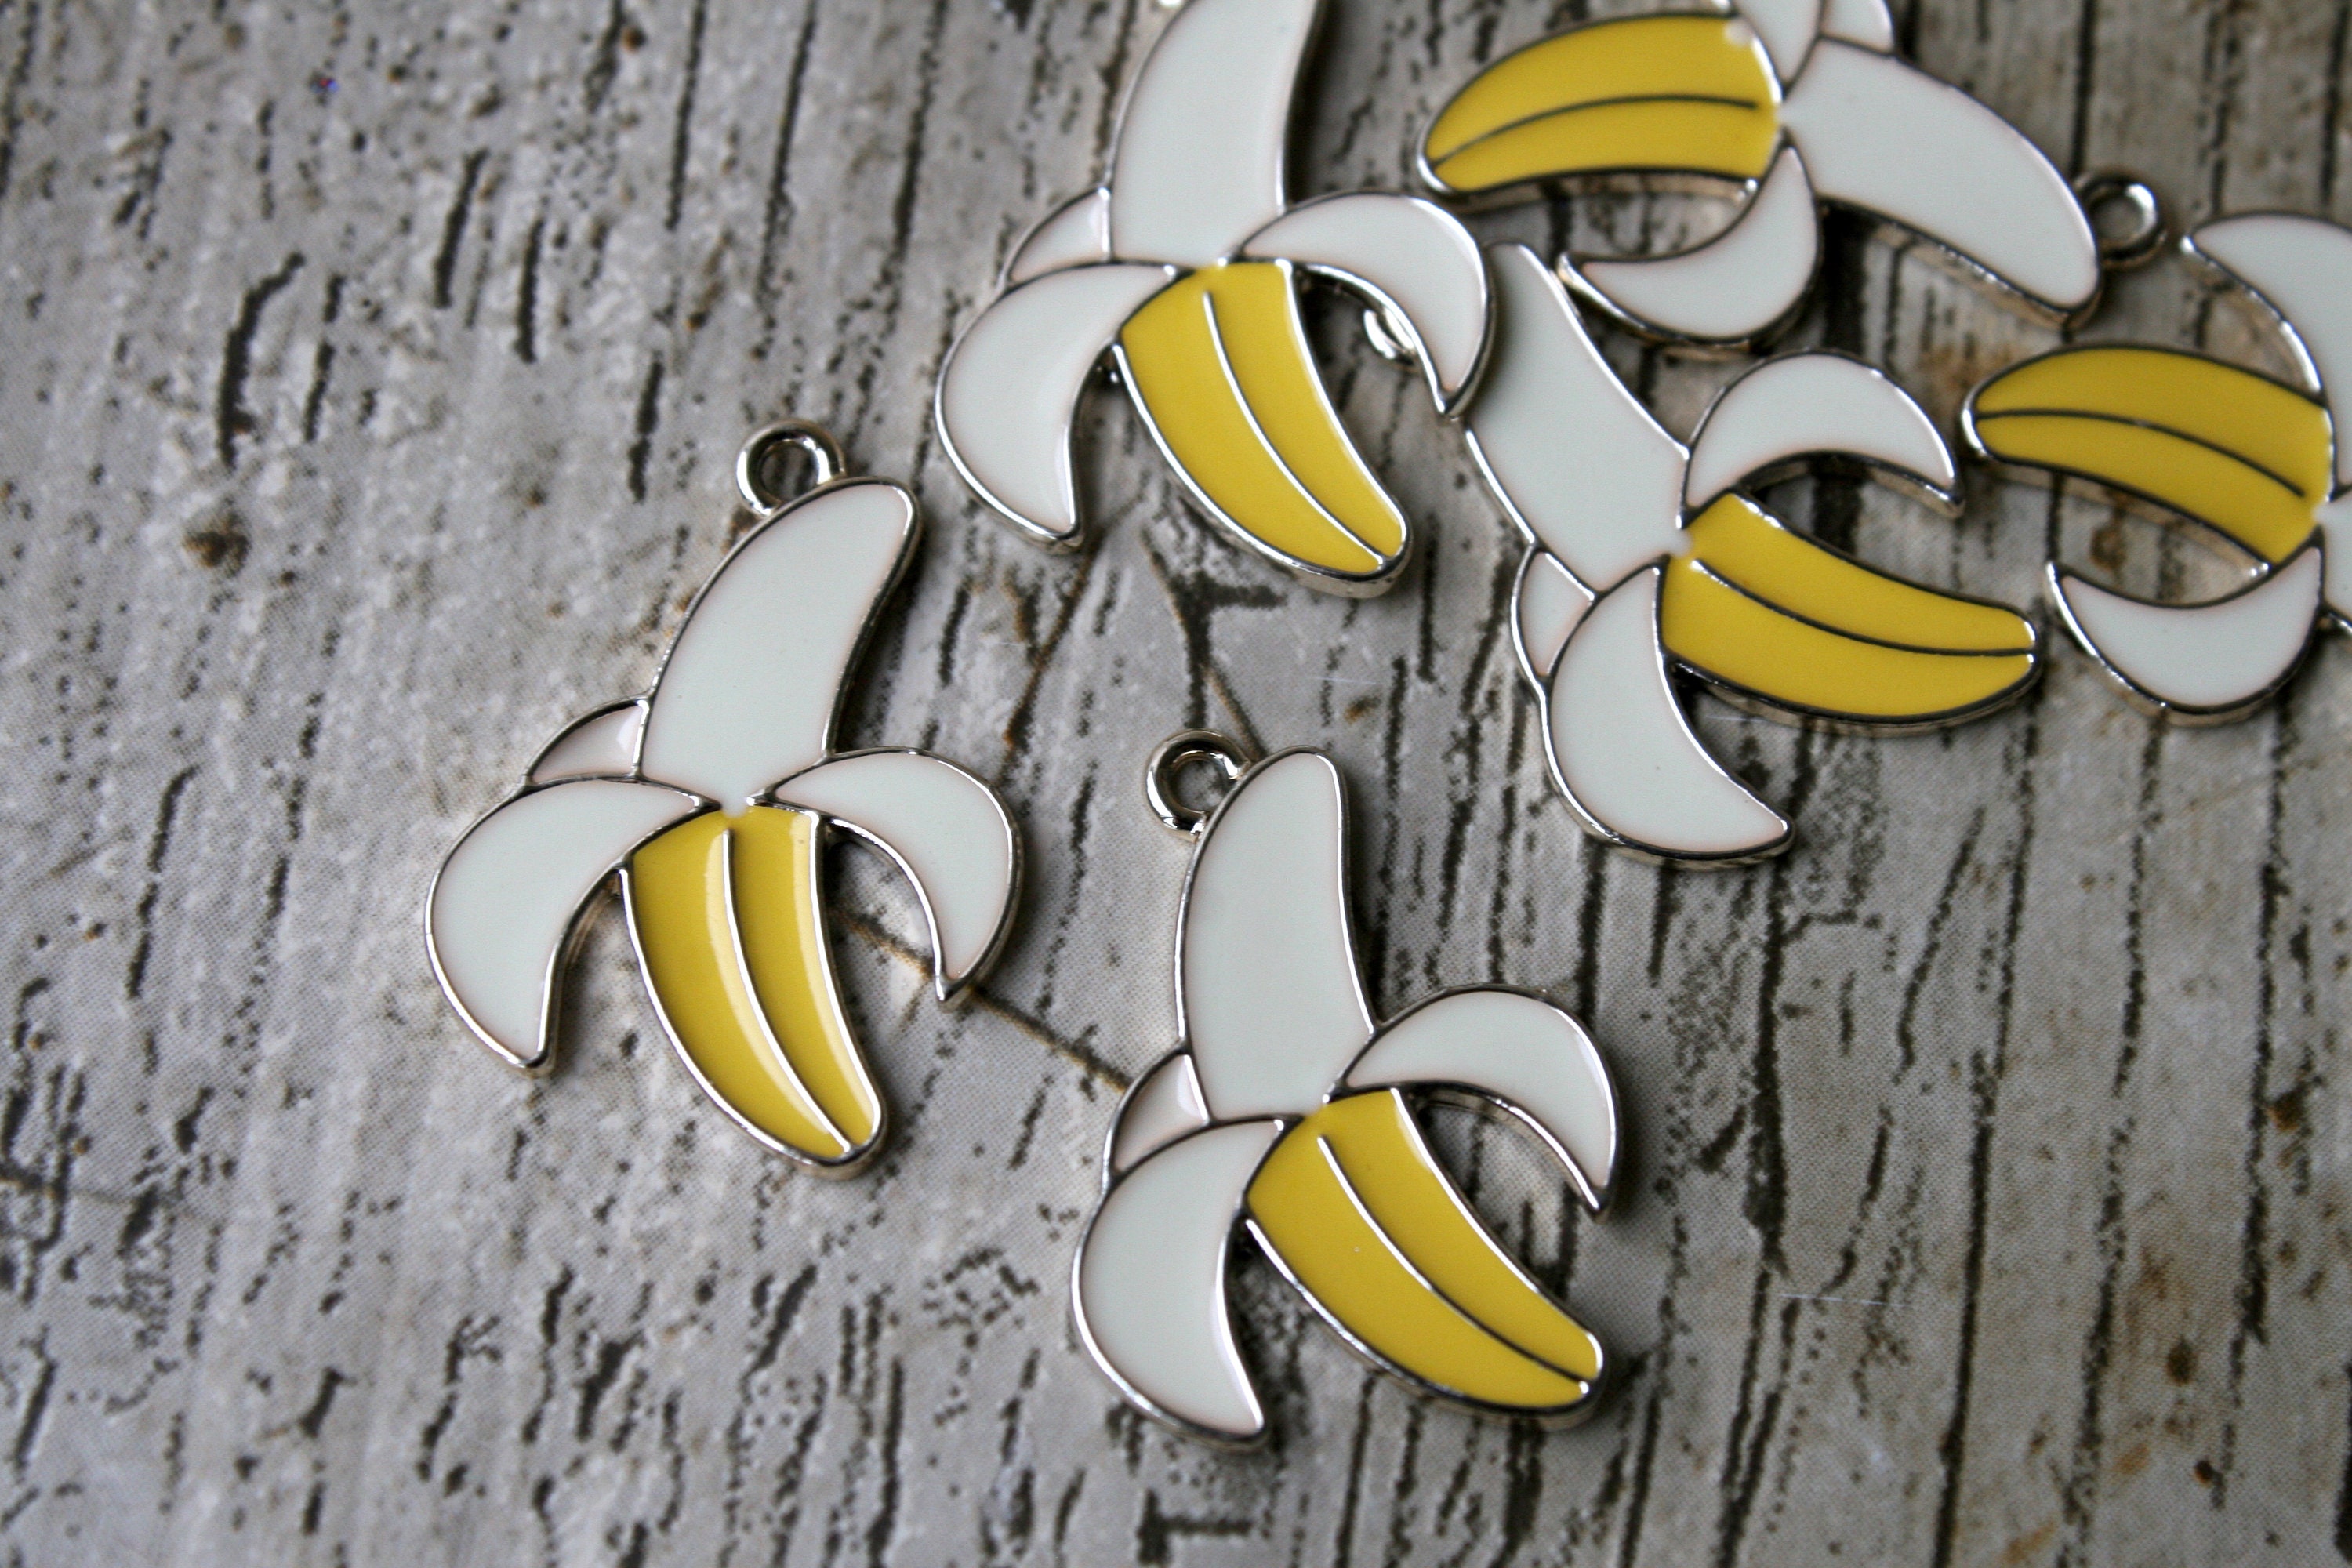 Gold Tone Bee Enamel Charms, Bee Charm, Jewellery Making, Metal Charm, Craft Supplies, Bumble Bee Charms, Craft Supplies, Bee Charms, Bees